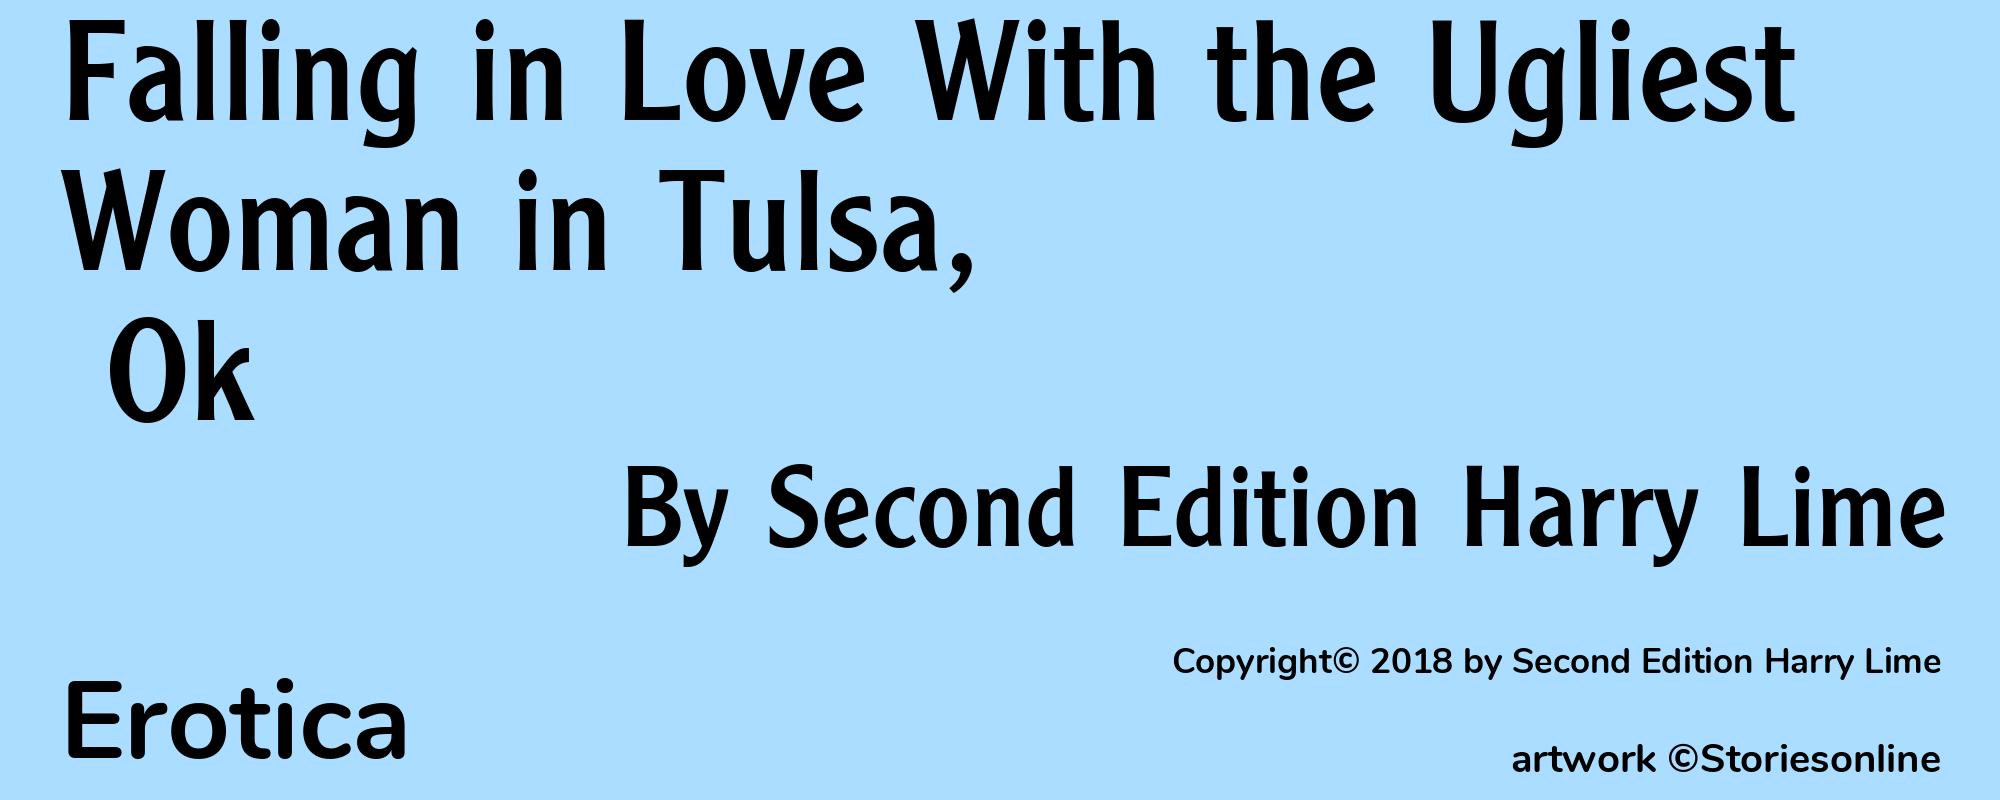 Falling in Love With the Ugliest Woman in Tulsa, Ok - Cover